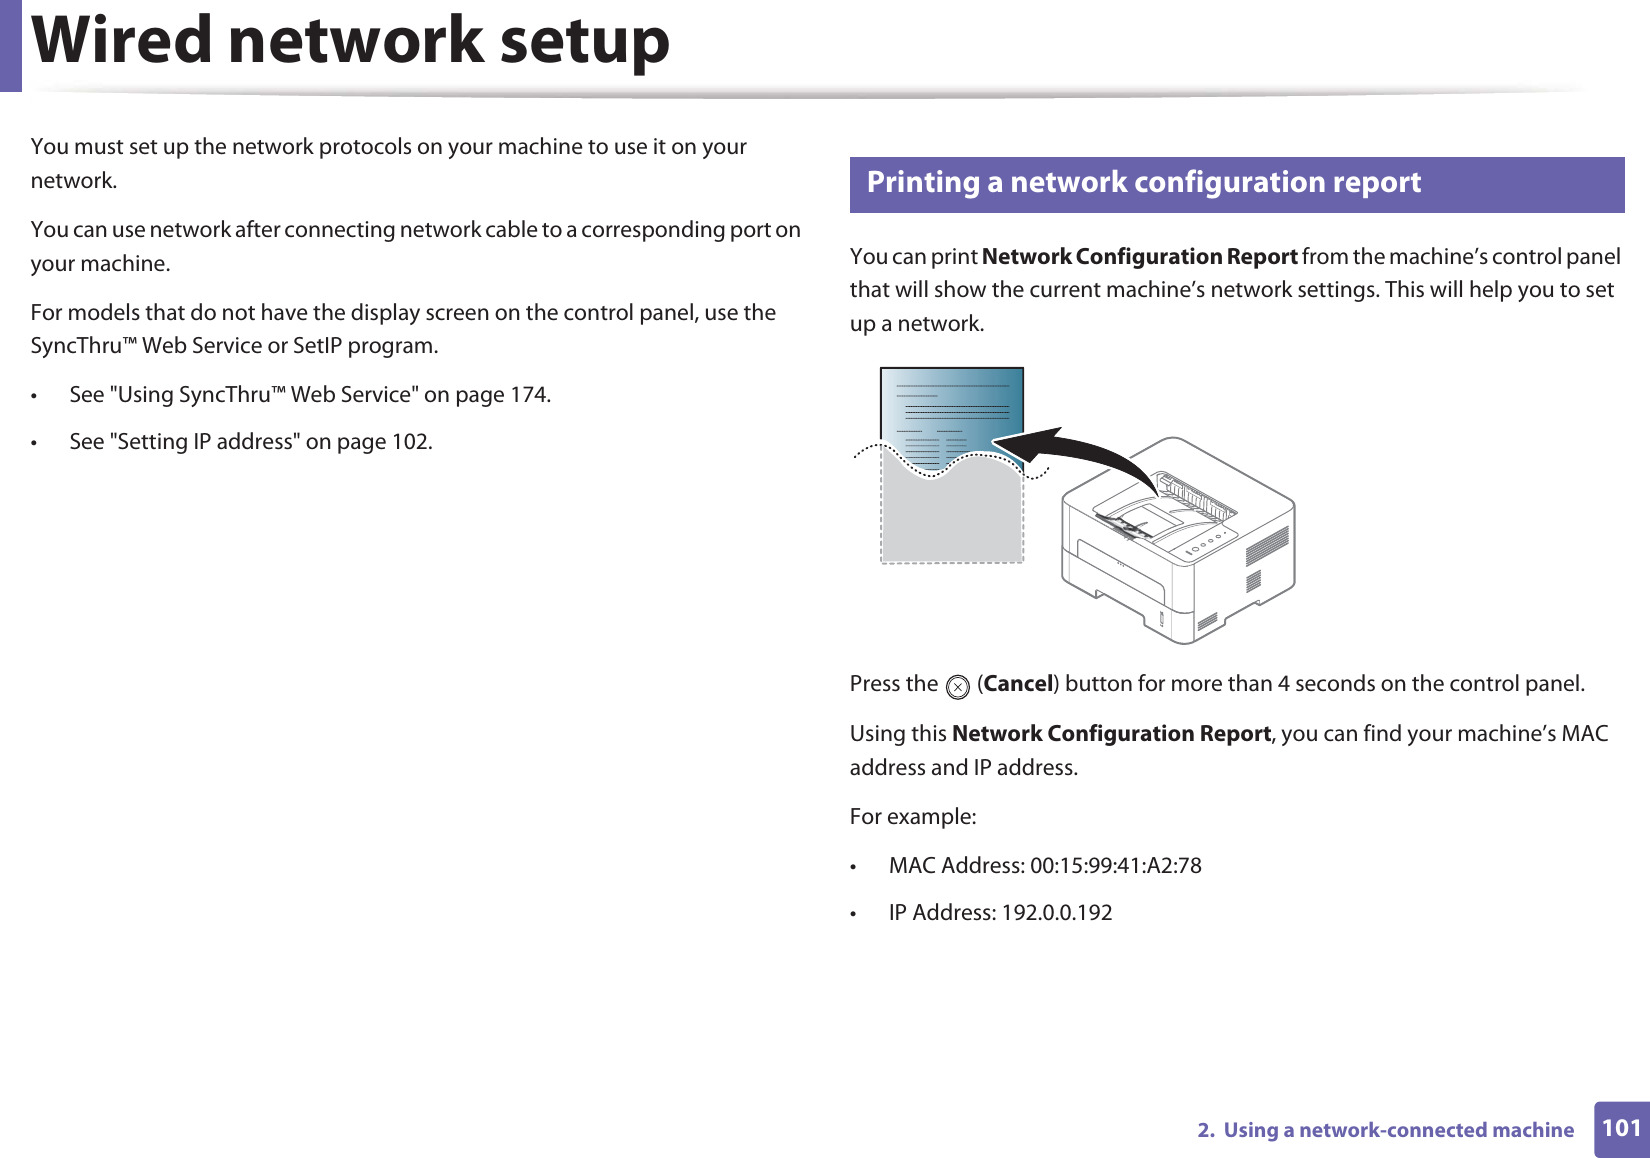 1012.  Using a network-connected machineWired network setupYou must set up the network protocols on your machine to use it on your network.You can use network after connecting network cable to a corresponding port on your machine. For models that do not have the display screen on the control panel, use the SyncThru™ Web Service or SetIP program.• See &quot;Using SyncThru™ Web Service&quot; on page 174.• See &quot;Setting IP address&quot; on page 102.4 Printing a network configuration reportYou can print Network Configuration Report from the machine’s control panel that will show the current machine’s network settings. This will help you to set up a network.Press the   (Cancel) button for more than 4 seconds on the control panel.Using this Network Configuration Report, you can find your machine’s MAC address and IP address.For example:• MAC Address: 00:15:99:41:A2:78• IP Address: 192.0.0.192